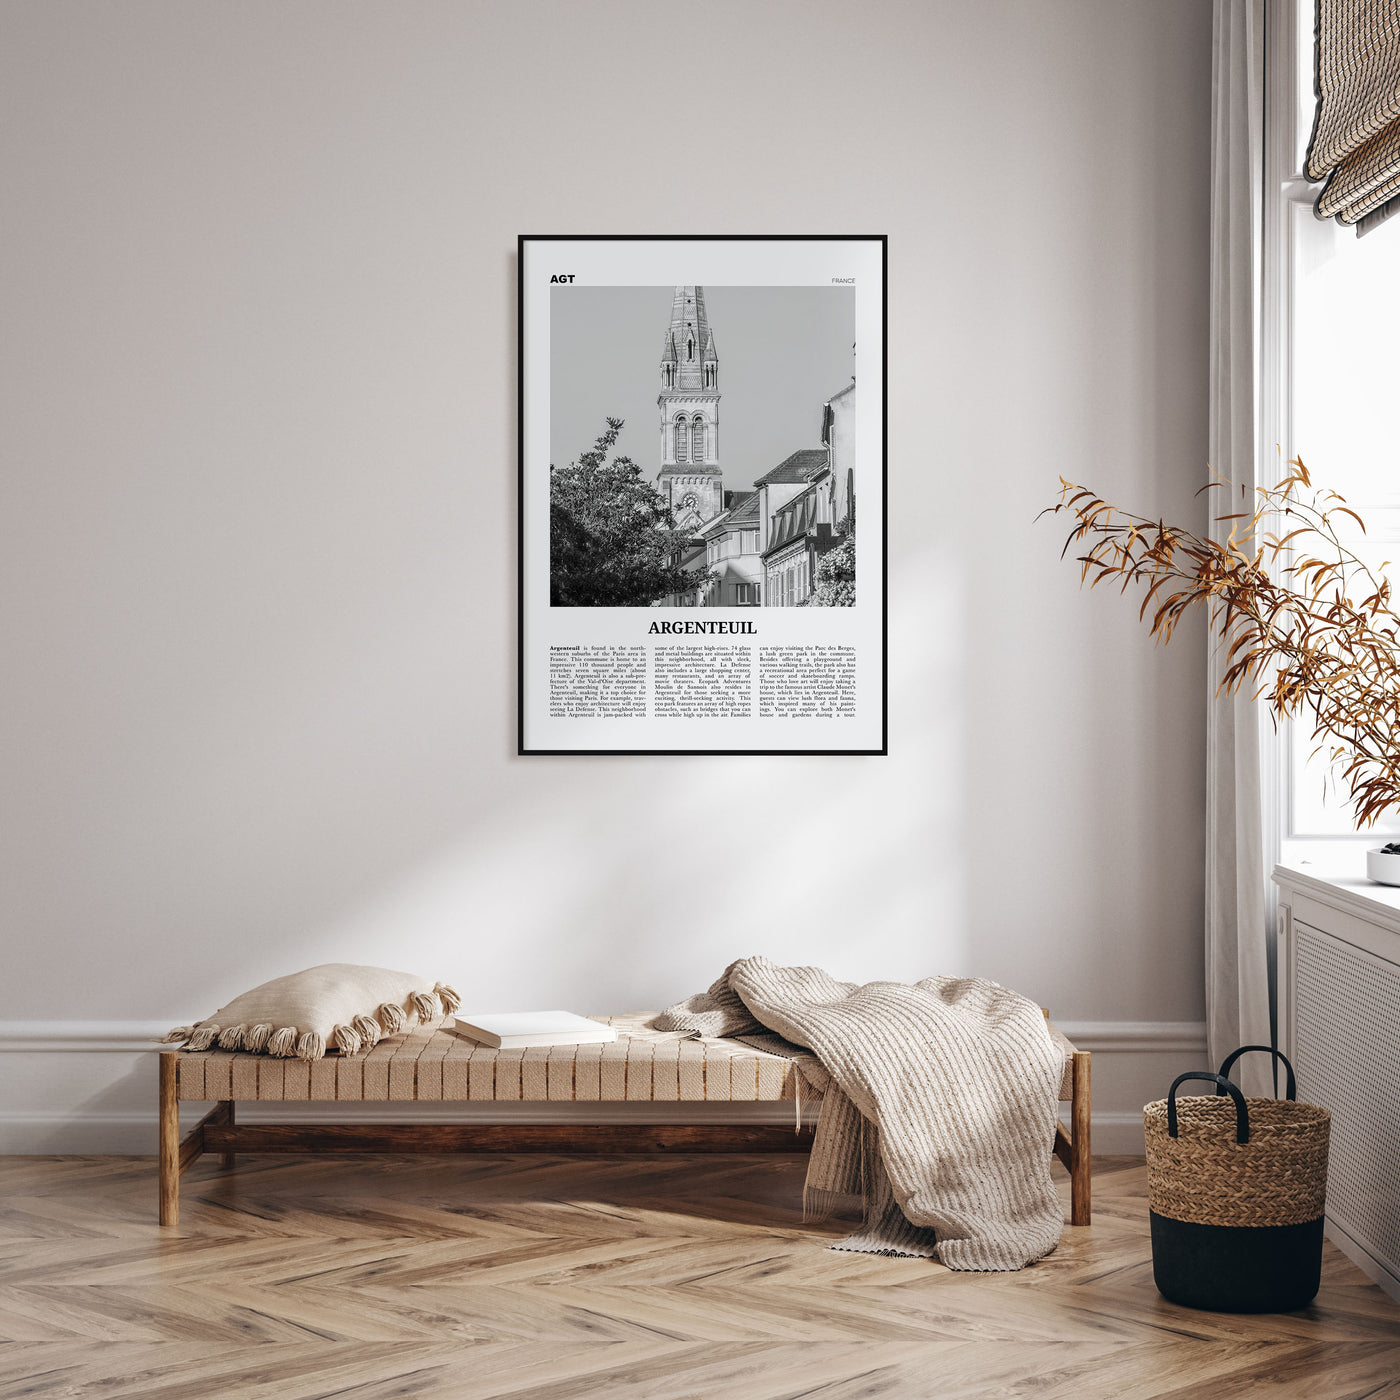 Argenteuil Travel B&W Poster